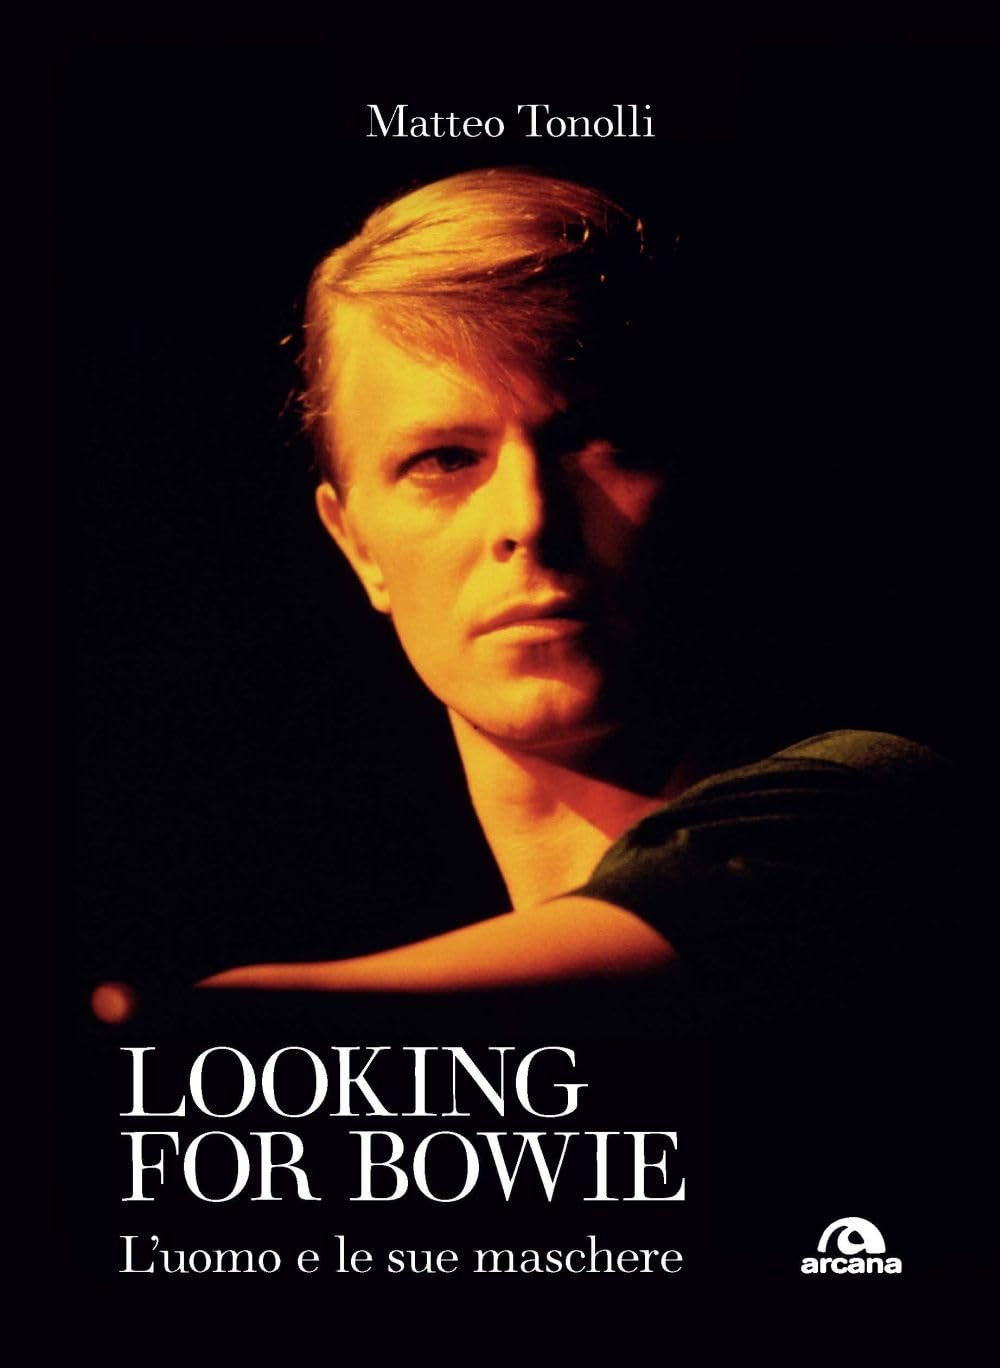 LOOKING FOR BOWIE by Matteo Tonolli